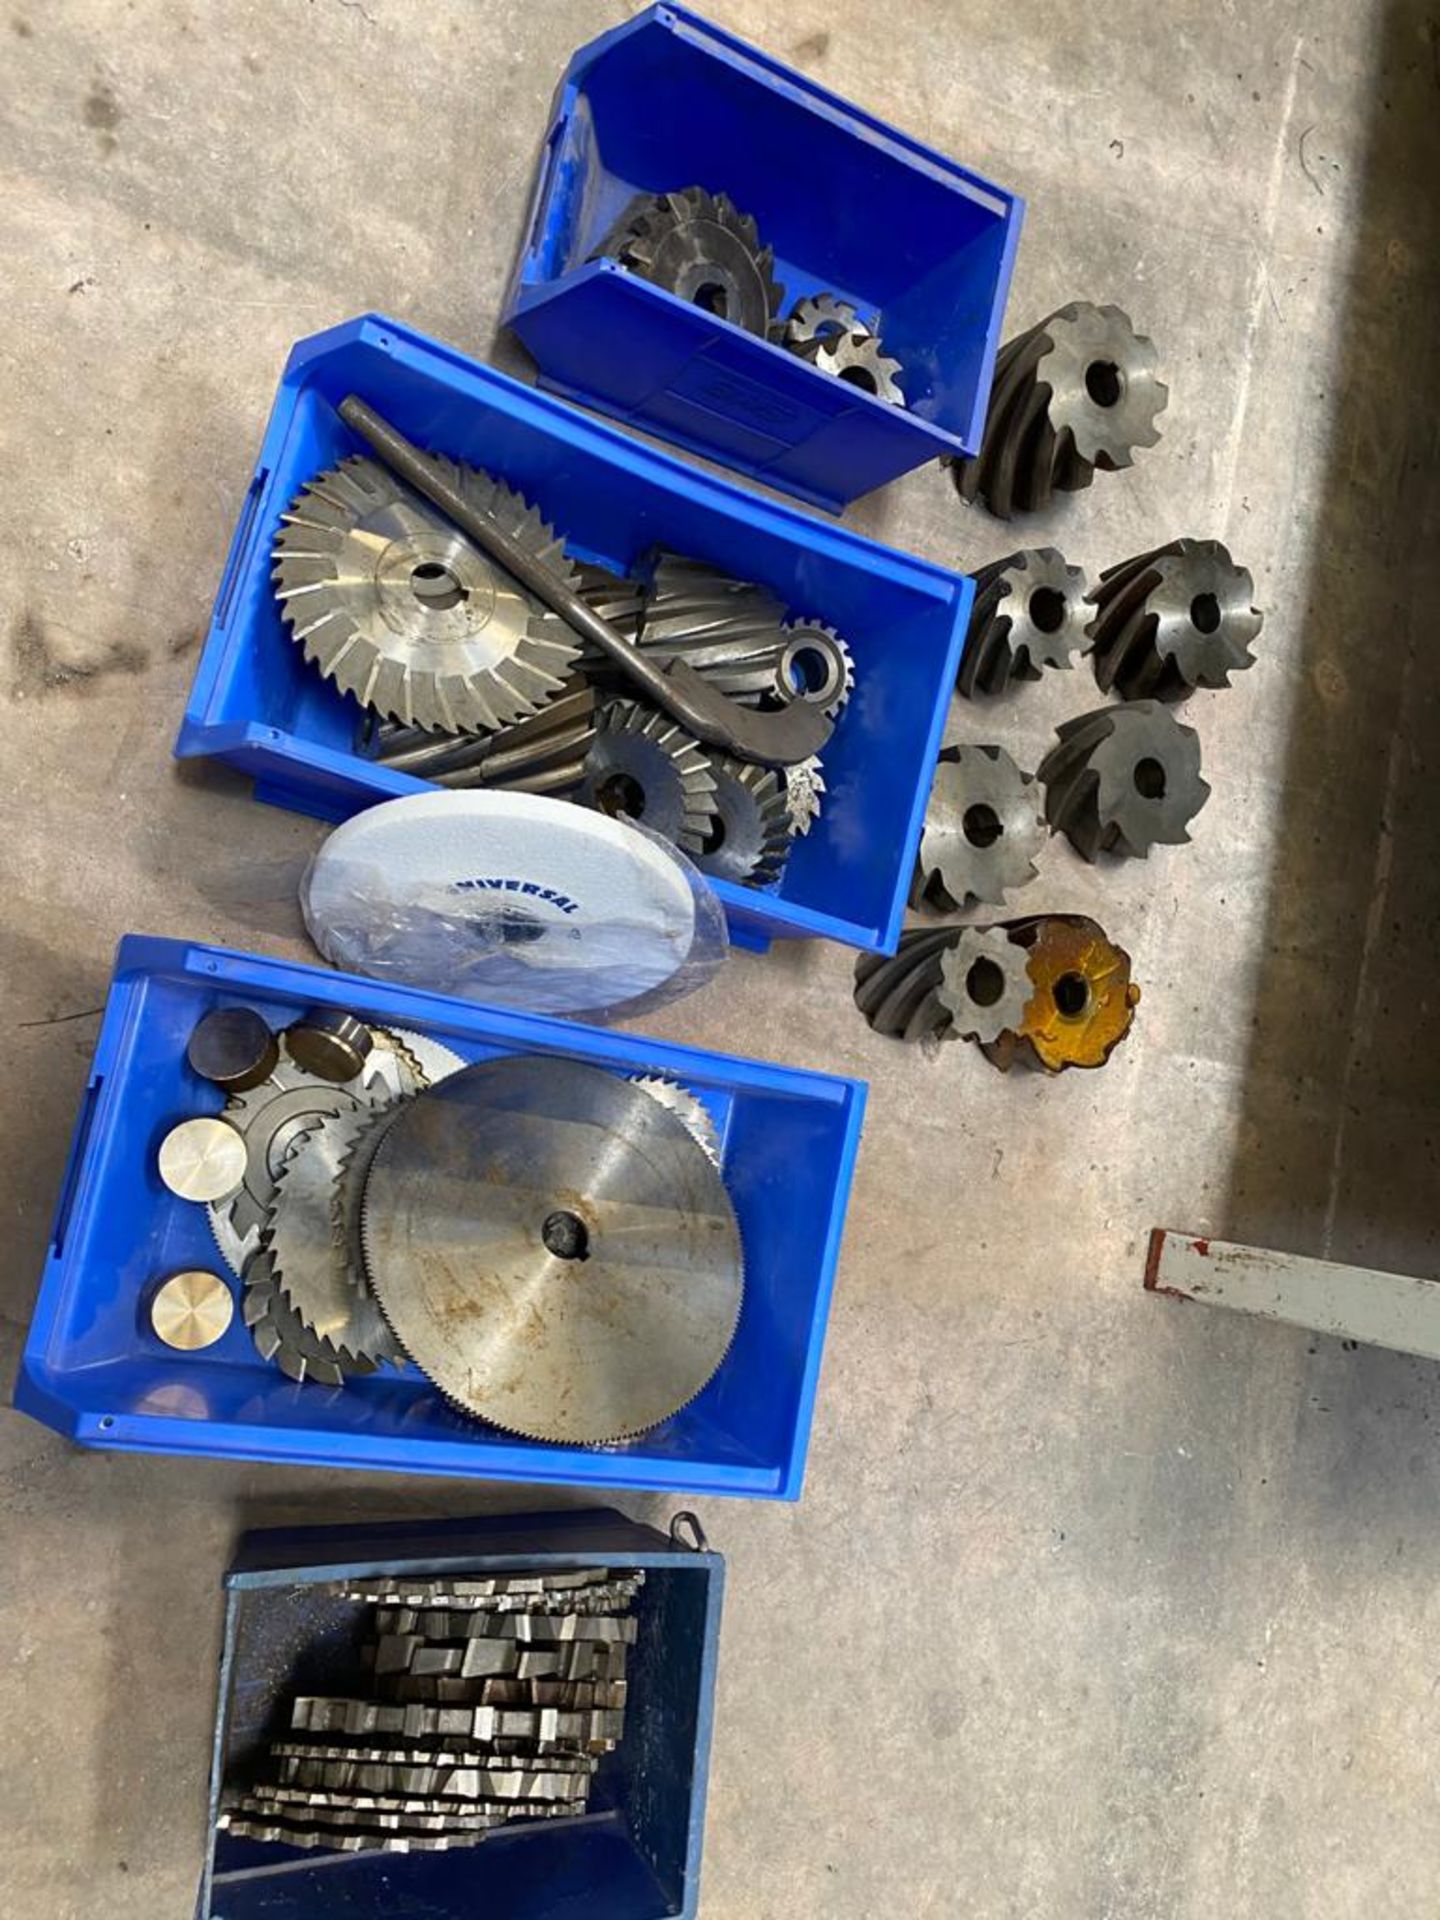 A Variety of Cutting Blades, Gears and Cogs